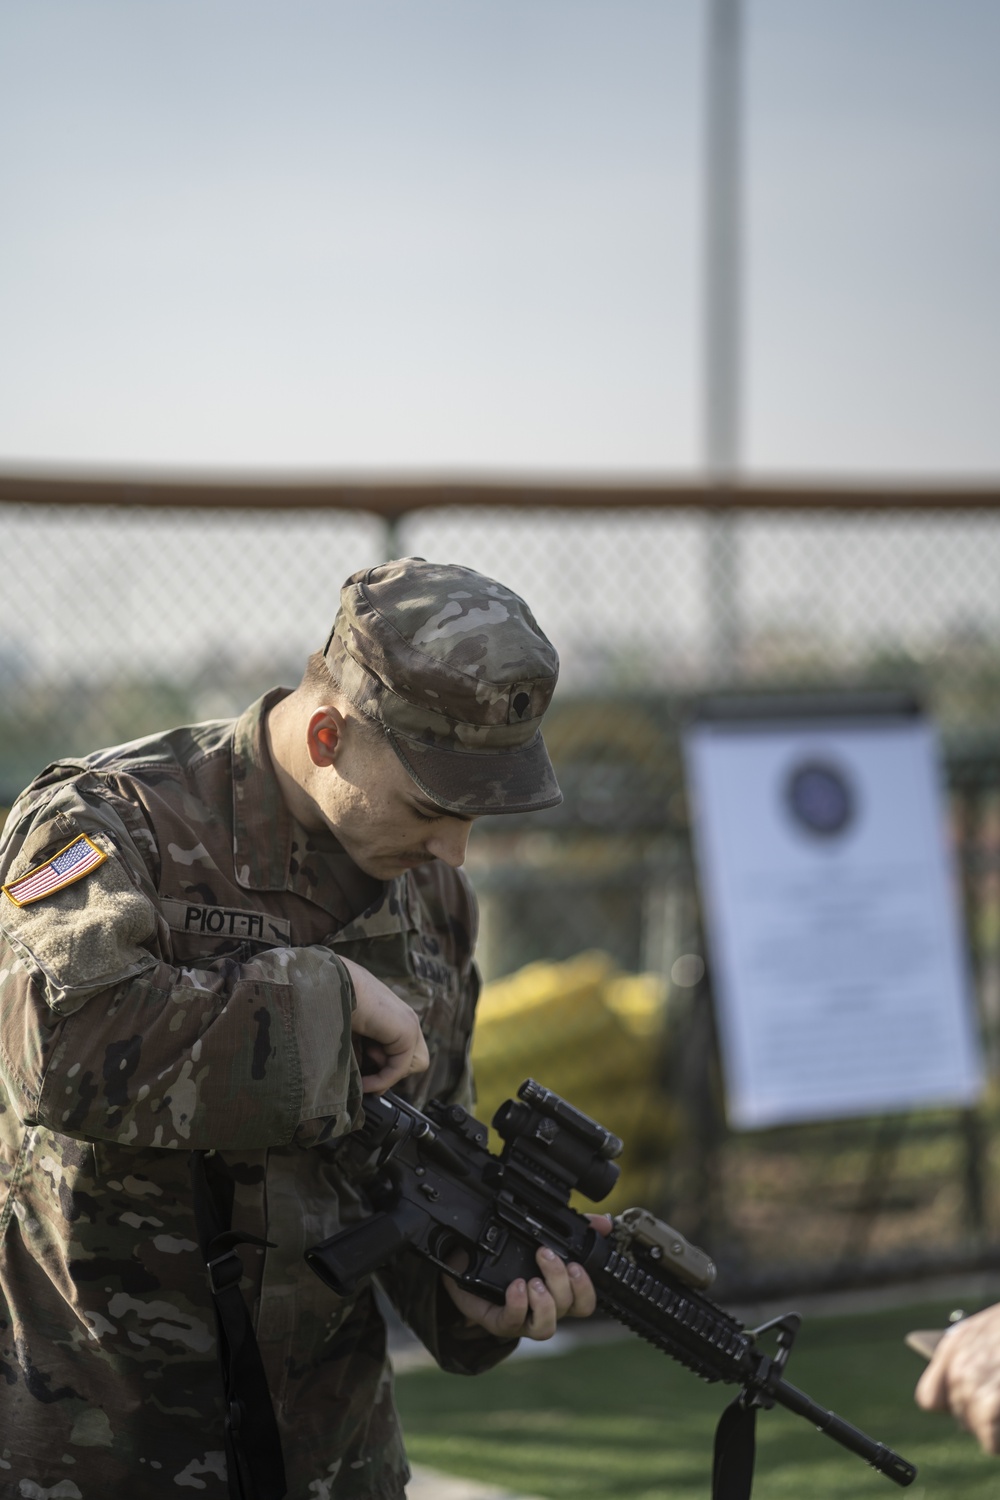 USARPAC BWC 2021: South Korea, Spc. Seth Piotti, an Eighth Army soldier, conducts a weapons check on an M4 carbine